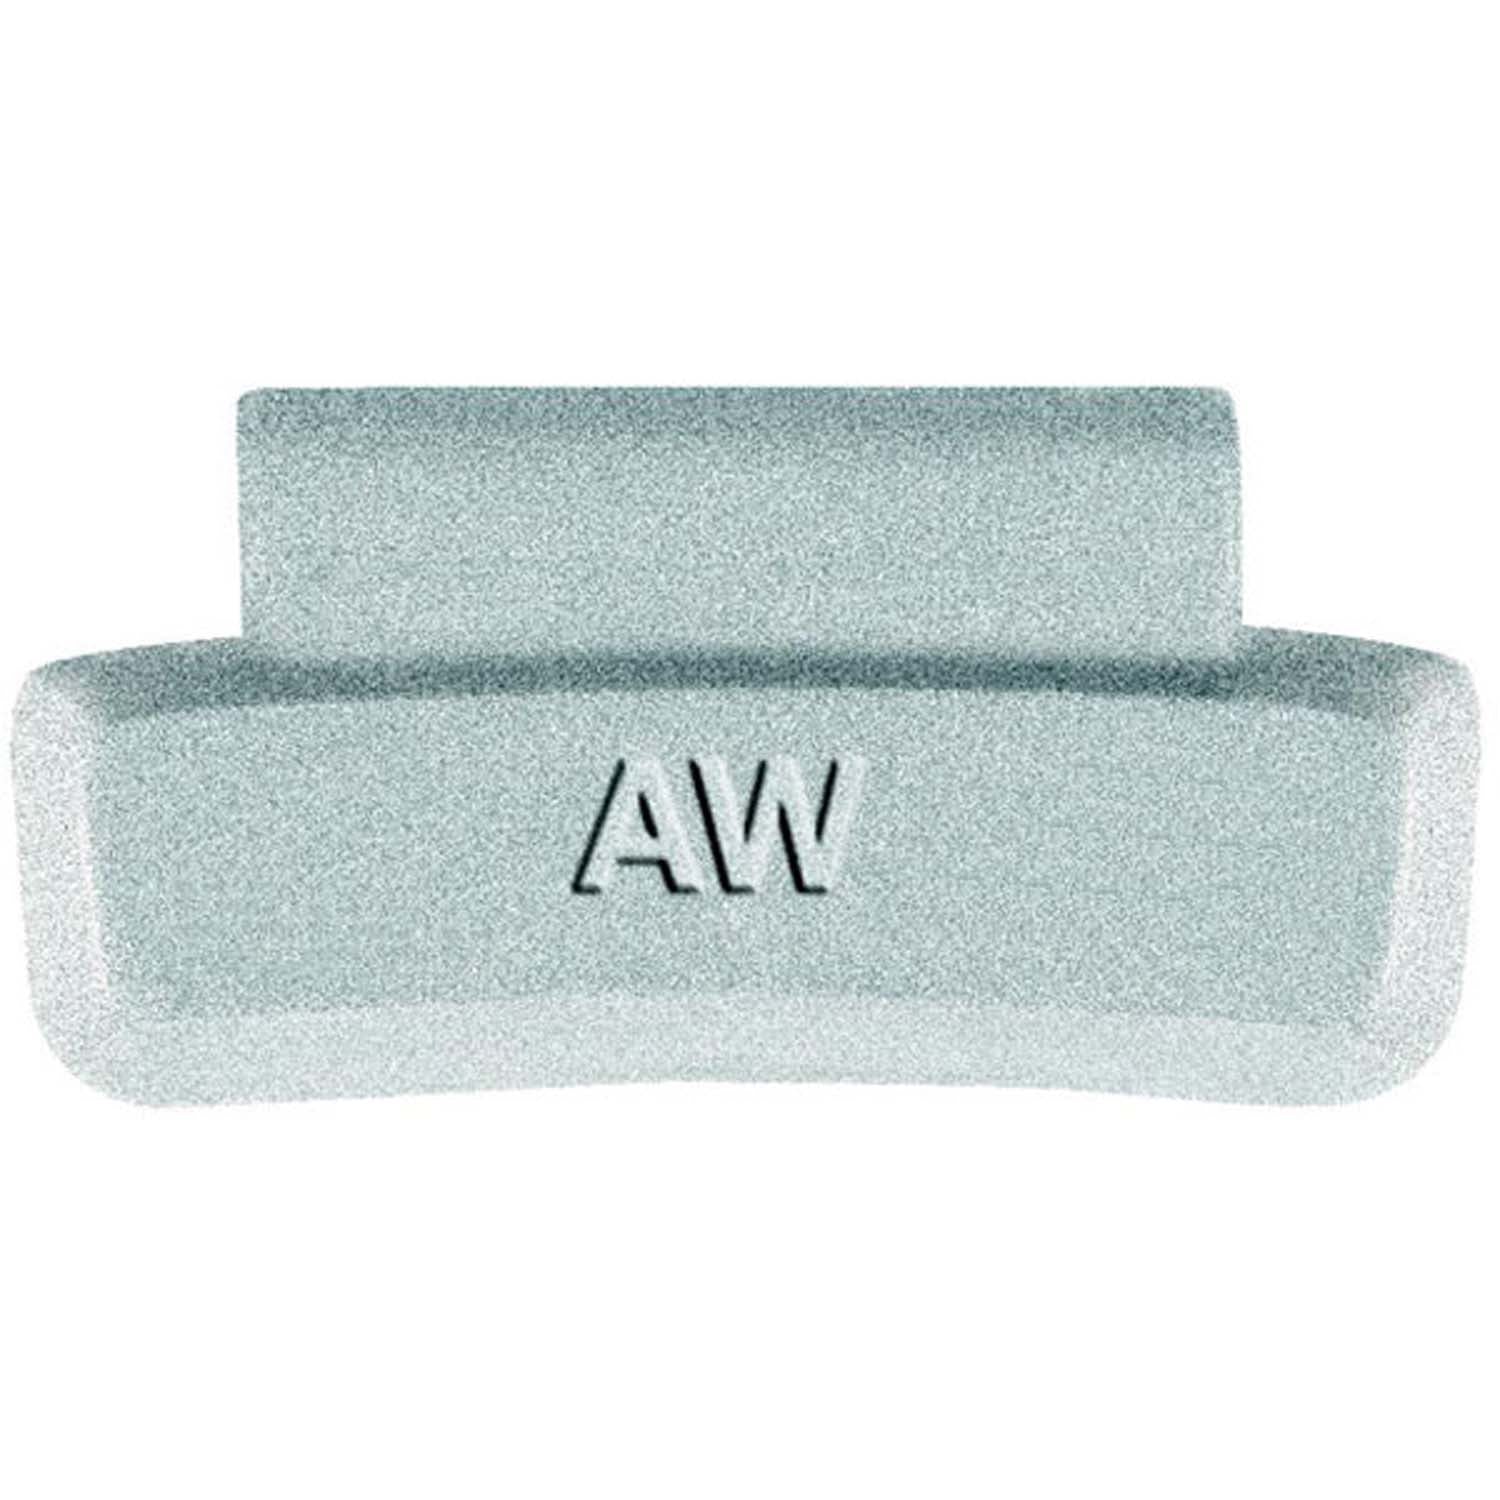 Perfect Equipment AW050N Coated Lead Wheel Weight 0.50 oz. - Box of 25